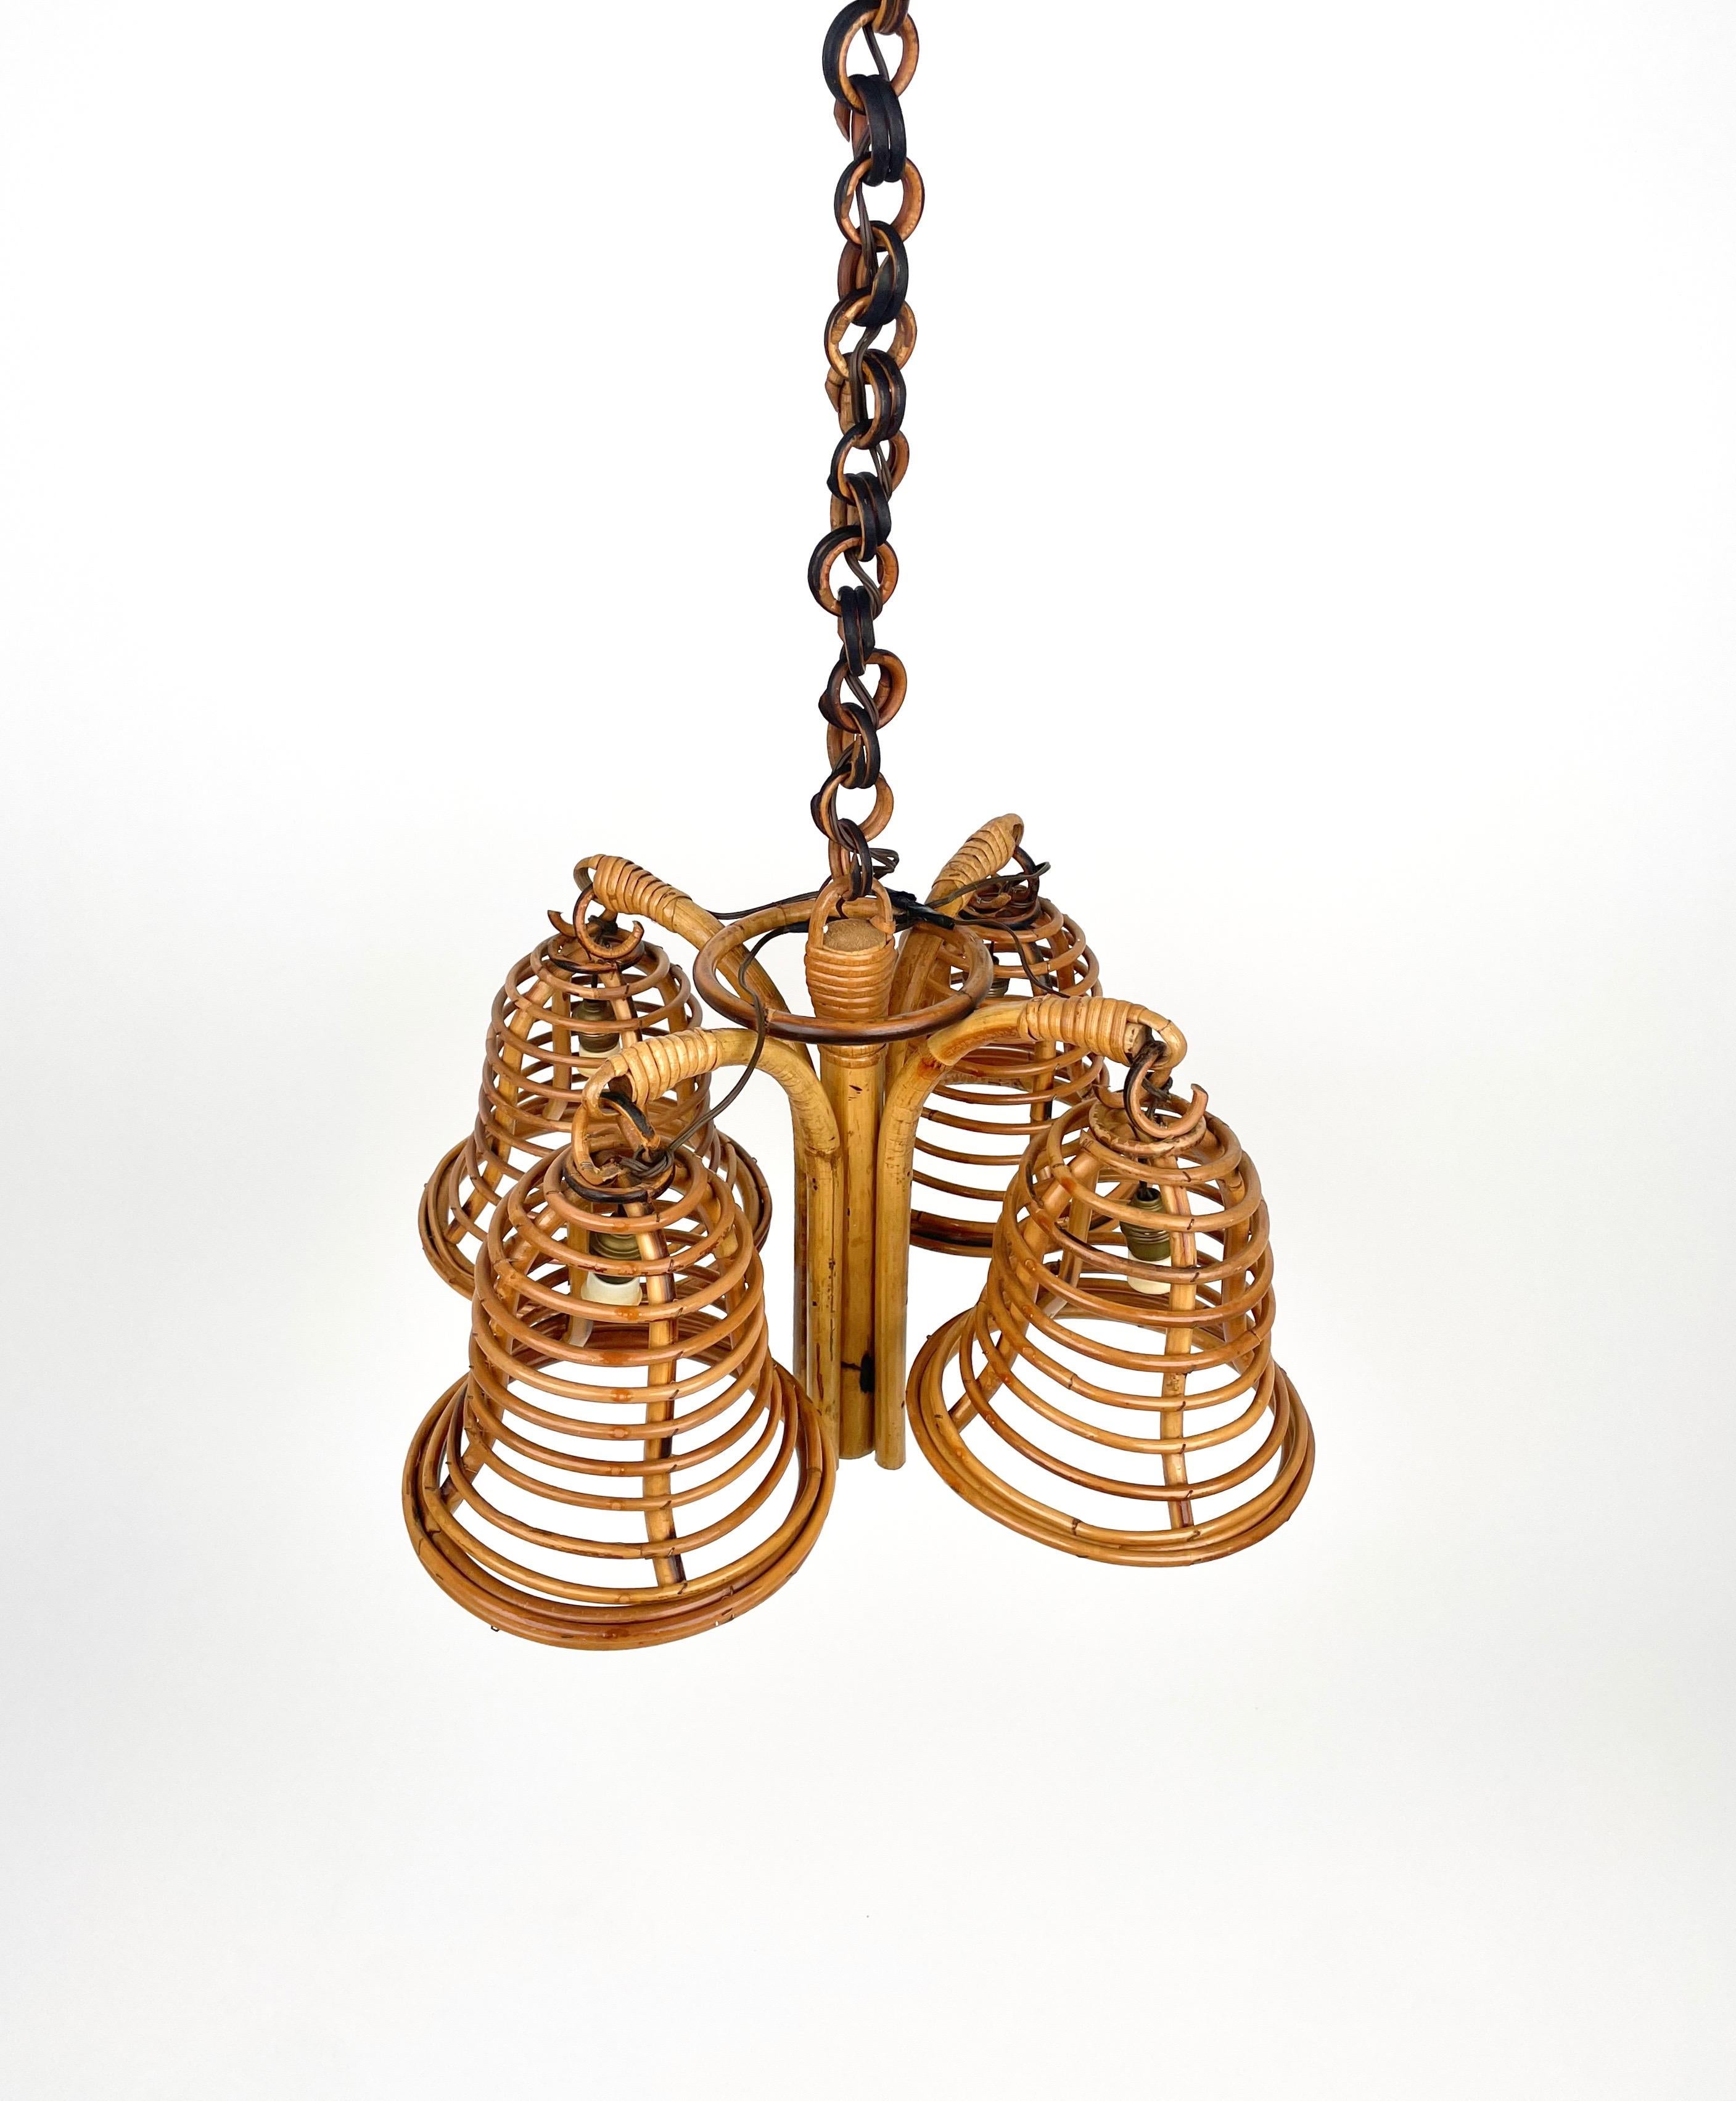 Mid-Century Modern Rattan & Bamboo Chandelier Pendant Louis Sognot Style, Italy 1960s For Sale